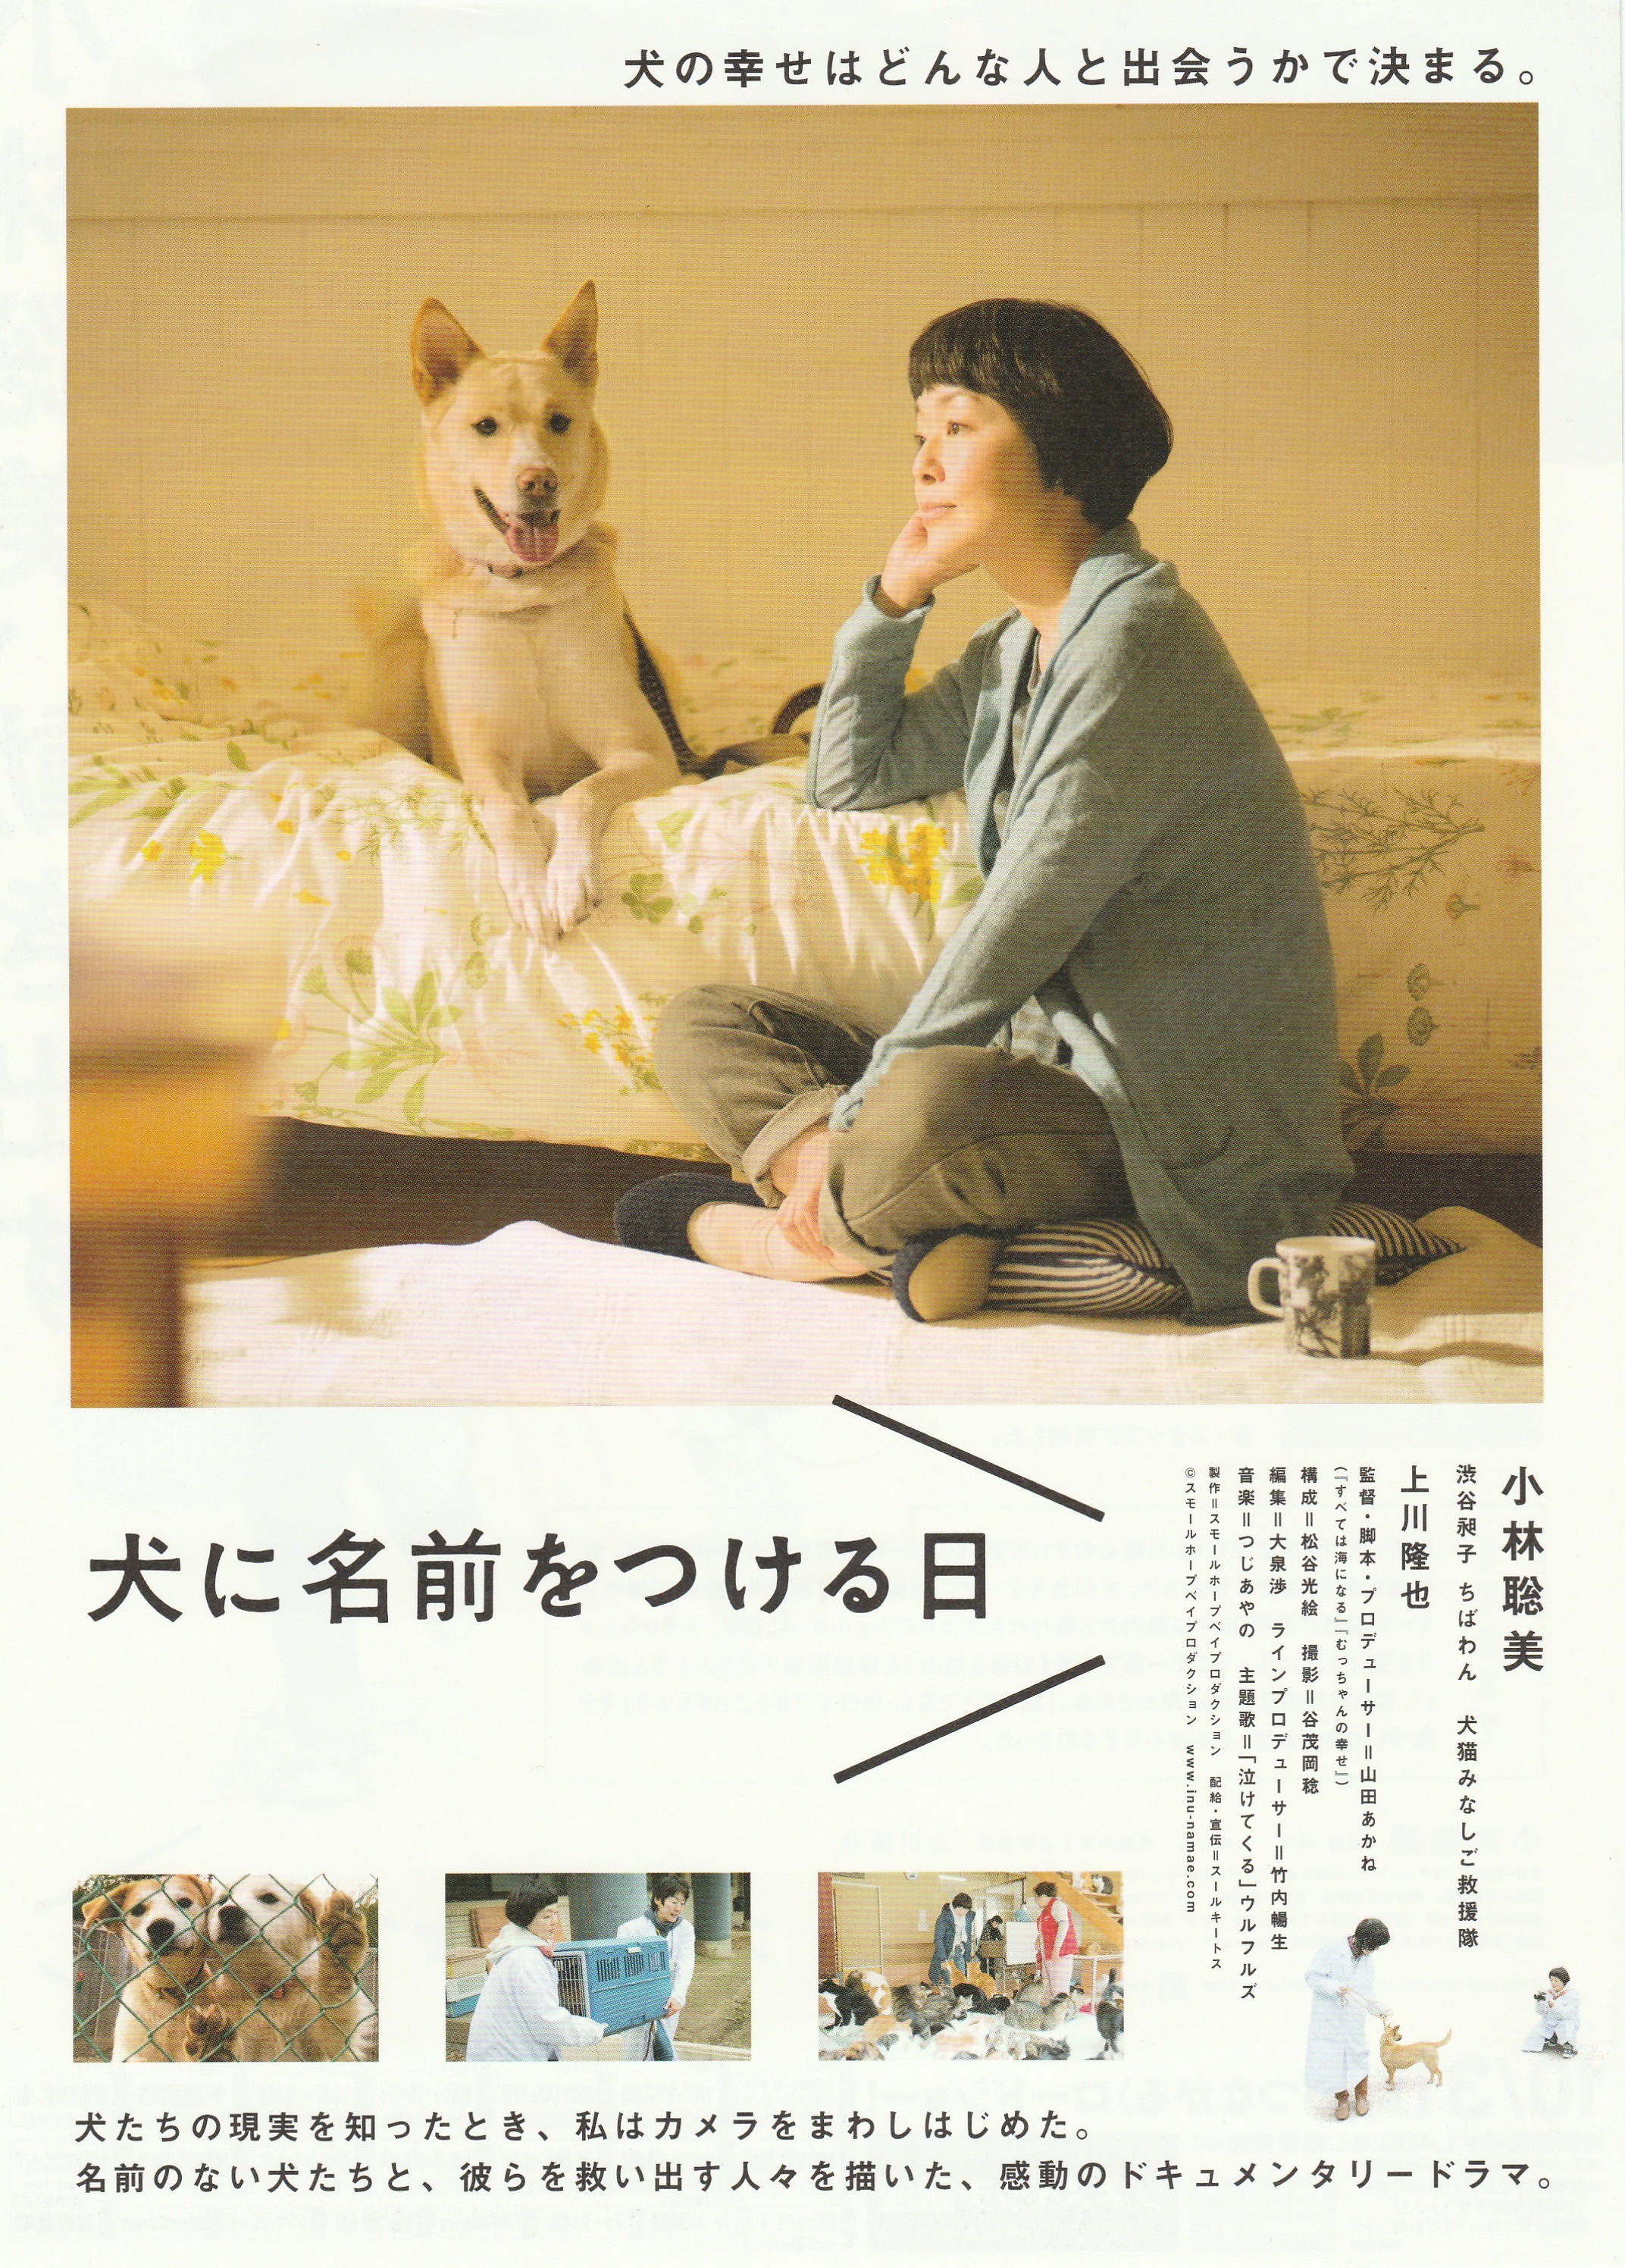 it is a akane yamada's new film. title: the name of the dog.